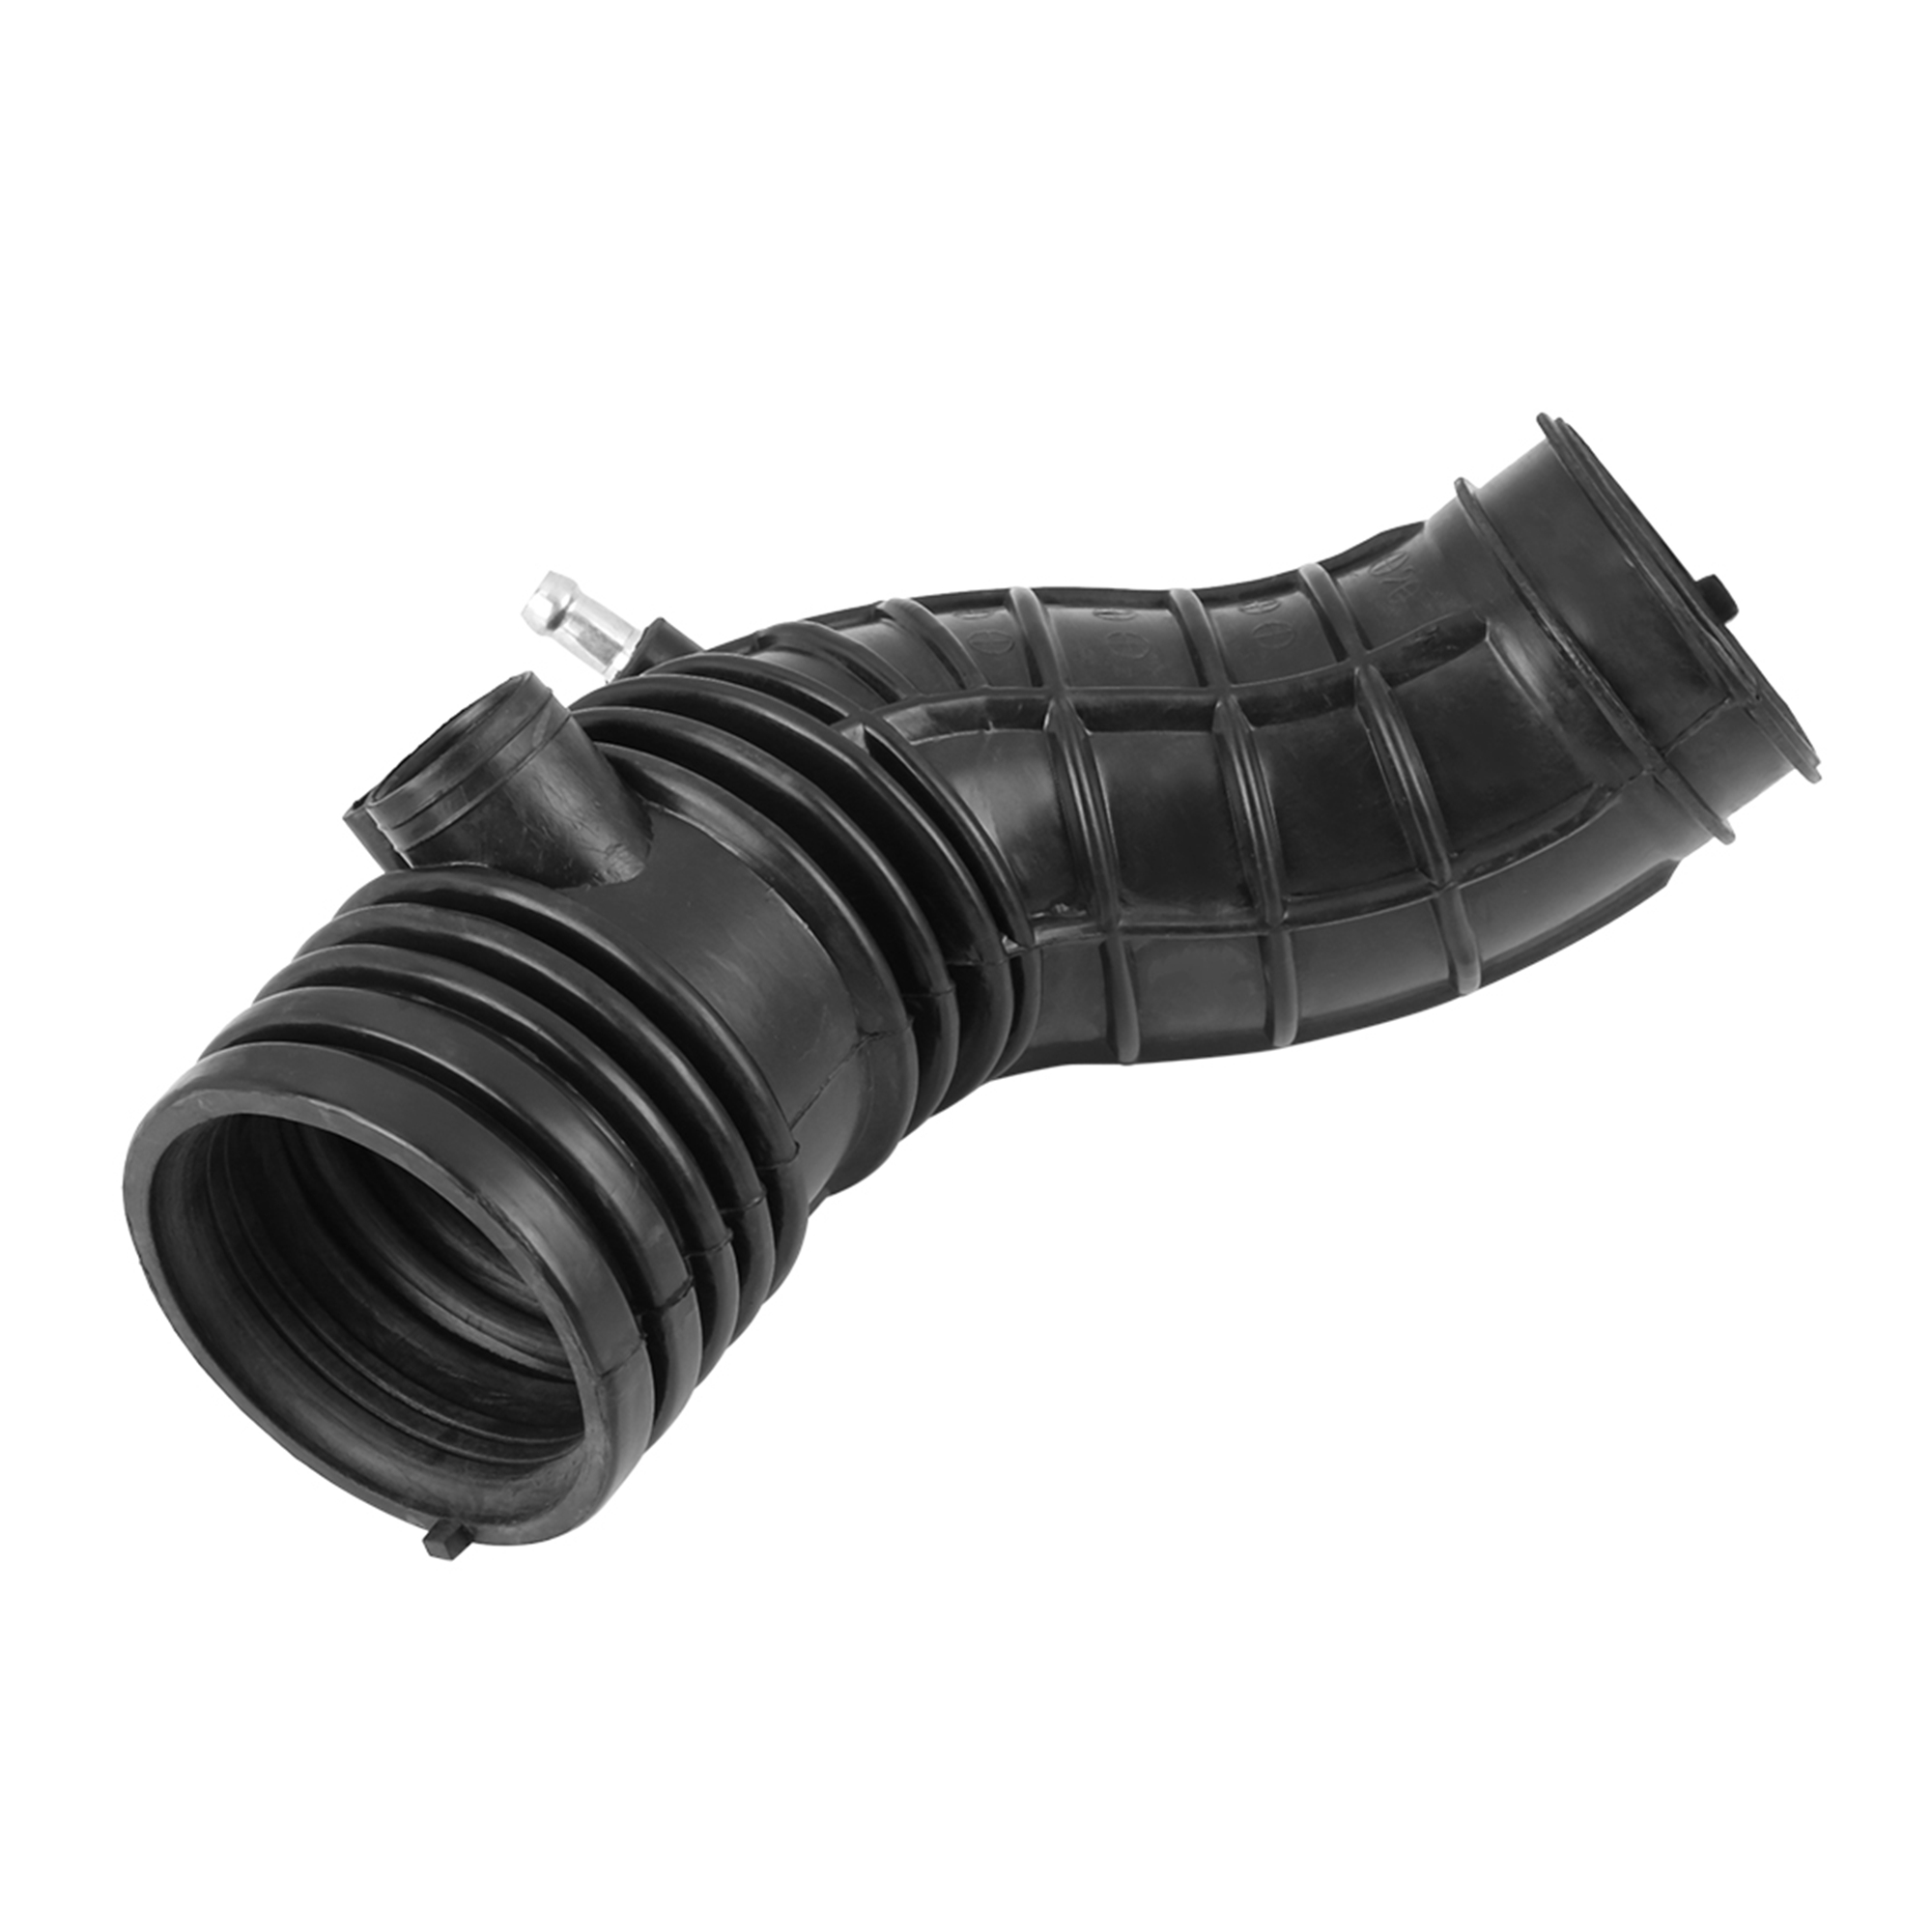 Unique Bargains Air Intake Tube Hose for Honda Accord I4 2.4L 03-07 Replace 17228-RAA-A00